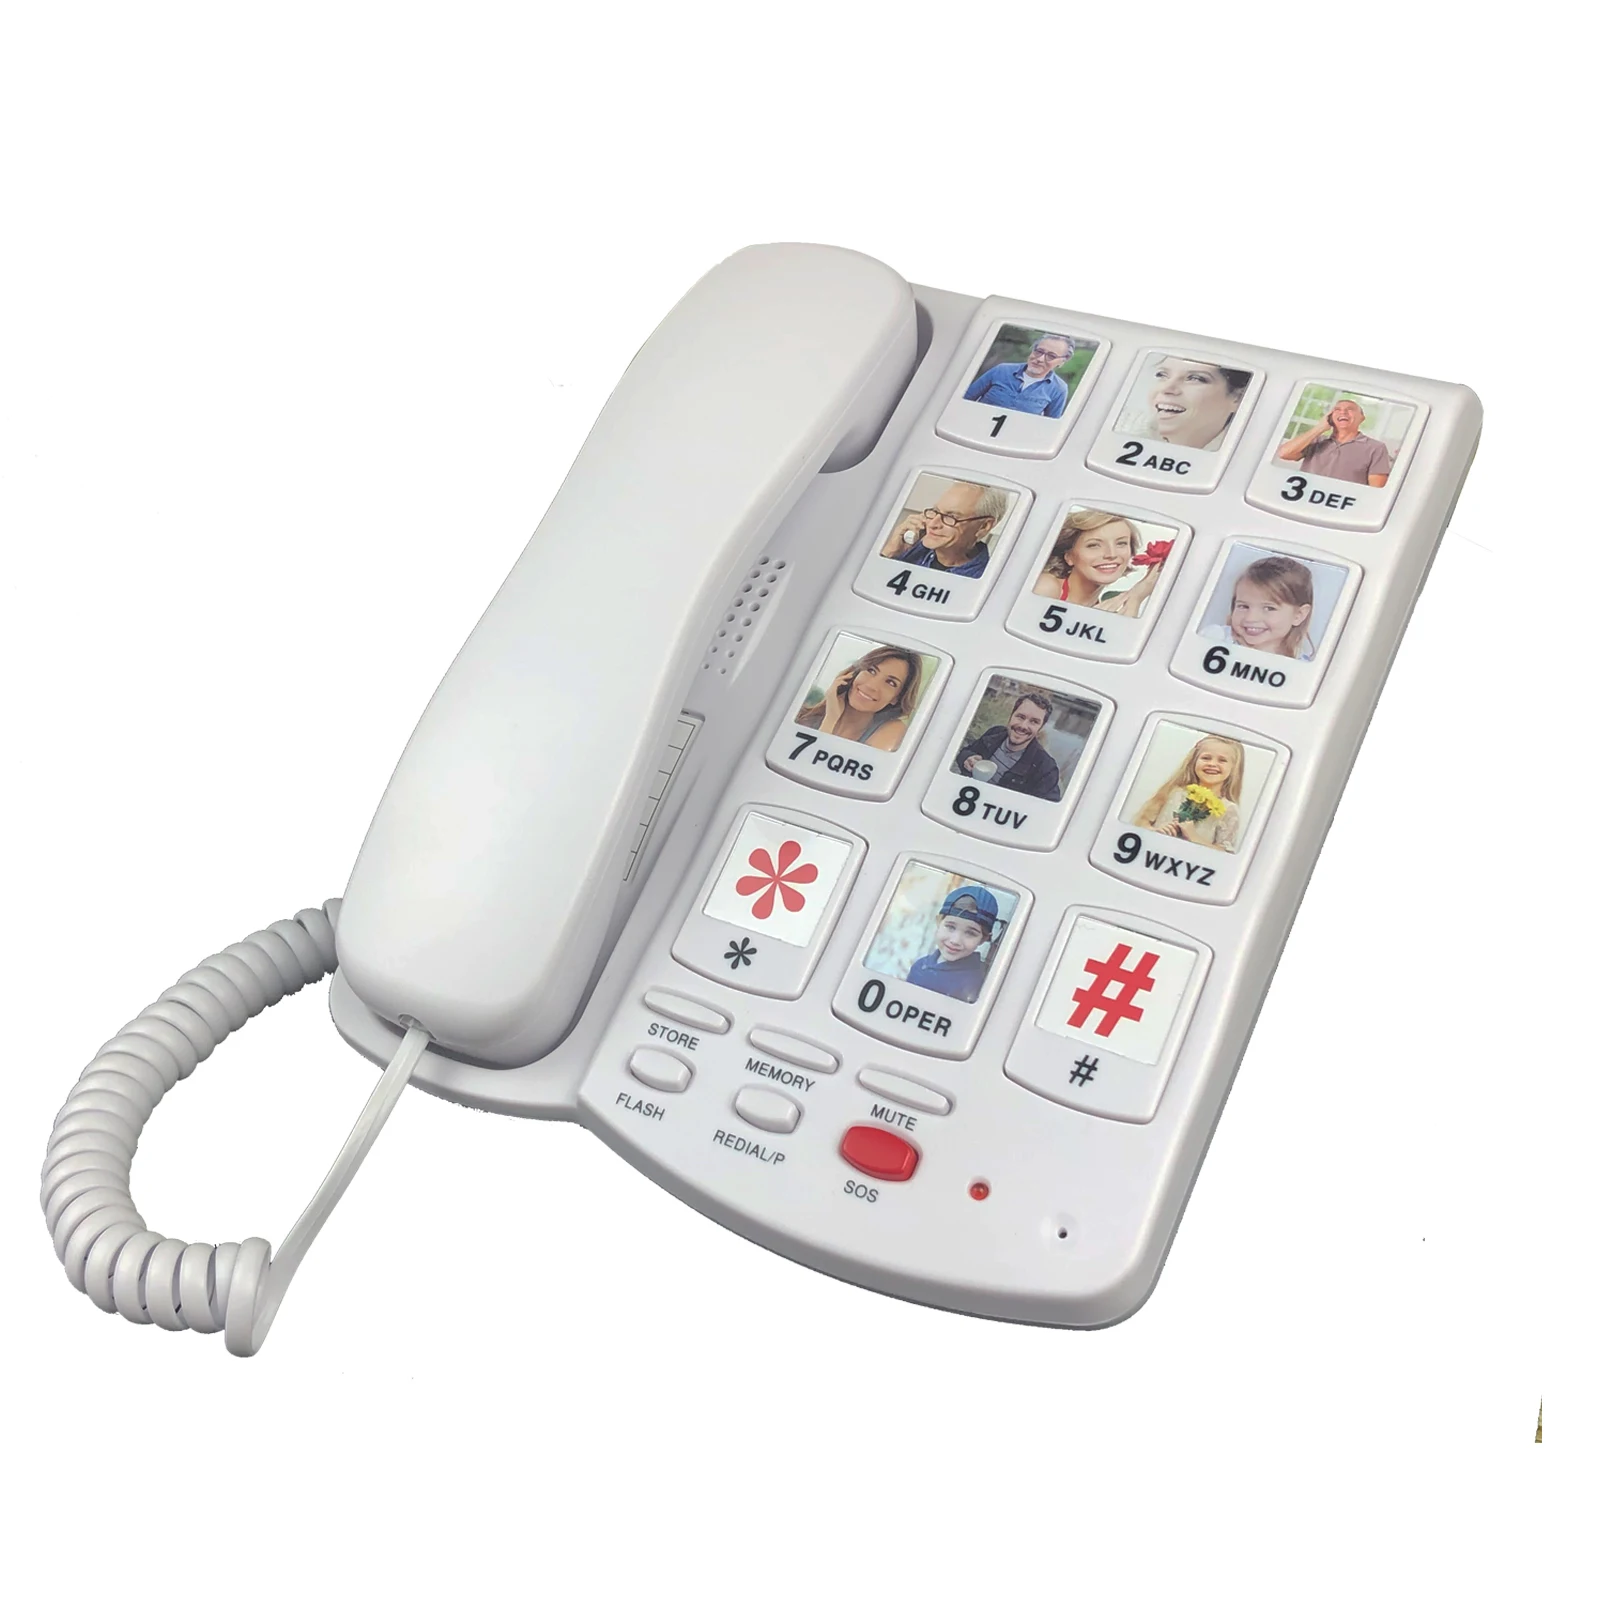 Big Button Corded Phone for Elderly Seniors, Large Button Landline Phone for Old People with Replaceable Picture Memory Key, Amp